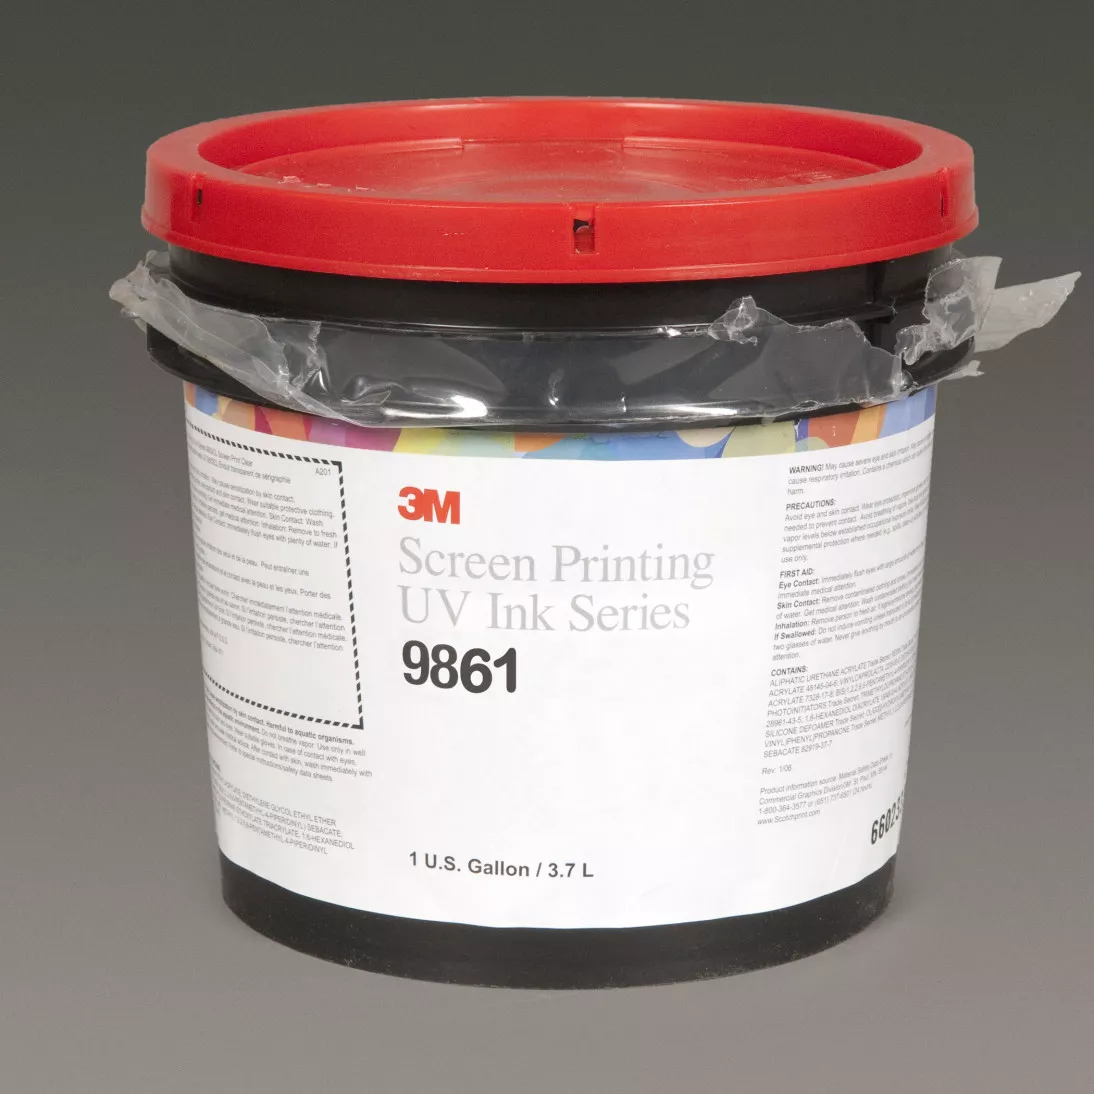 3M™ Screen Printing UV Ink 9861, Light Green, 1 Gallon Container